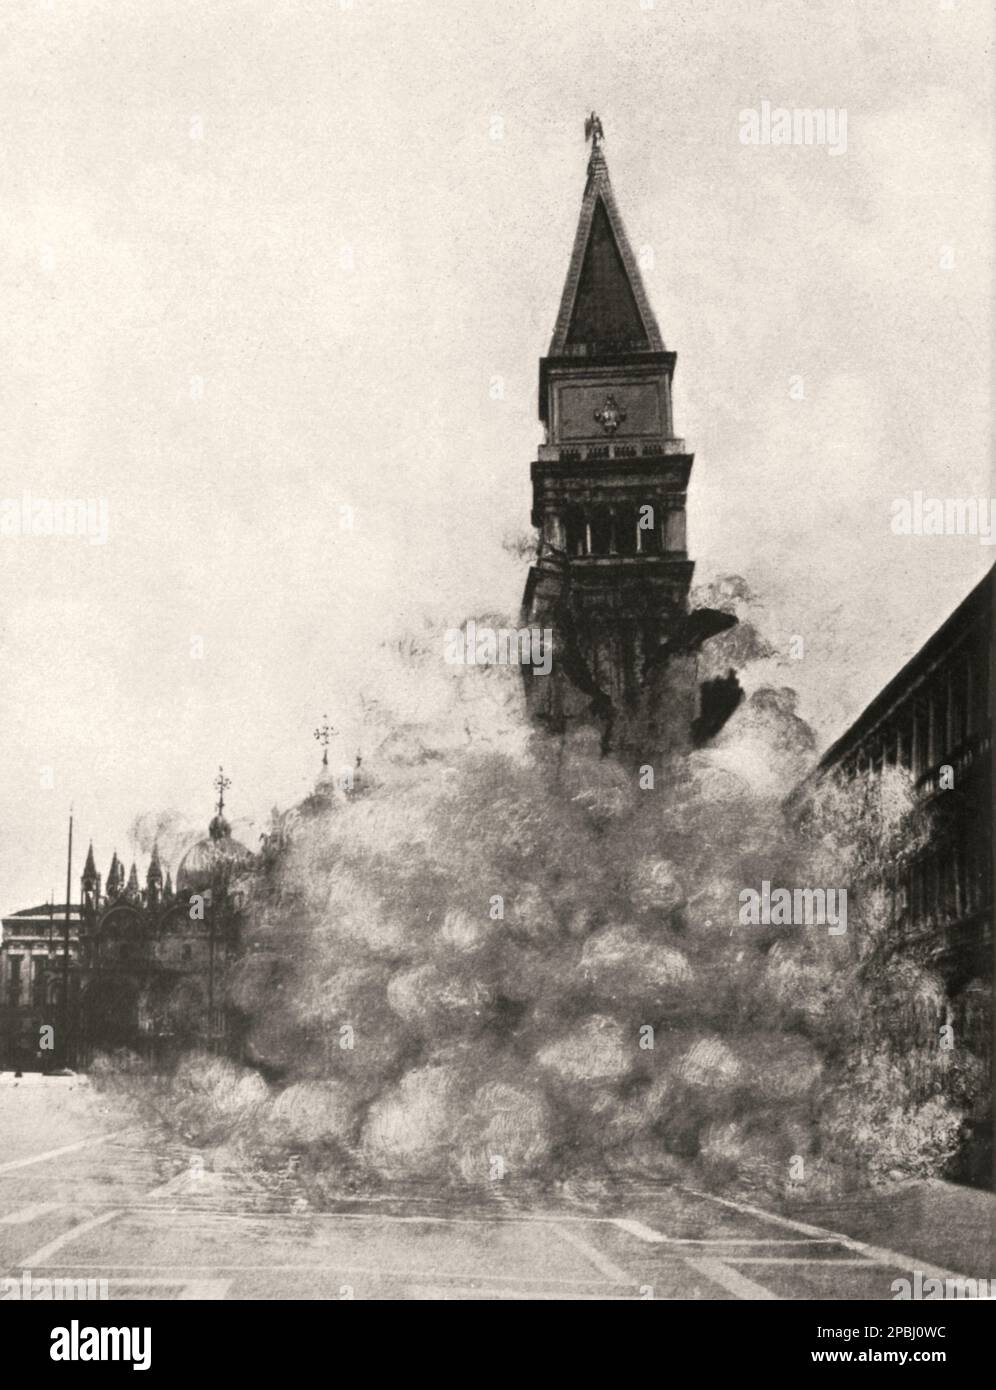 1902 , 14 july , VENEZIA ,  ITALY : A photo-montage of the collapse of the bells tower of Saint Mark Cathedral in Venice . The new tower was rebuilt and re-opened the day 25 april 1912 - CATTEDRALE e PIAZZA SAN MARCO - CAMPANILE  - VENICE - ITALIA - FOTO STORICHE - HISTORY - GEOGRAFIA - GEOGRAPHY  -  FOTOMONTAGGIO - STORIA  - disastro - desaster - crollo - crash down  ---  Archivio GBB Stock Photo